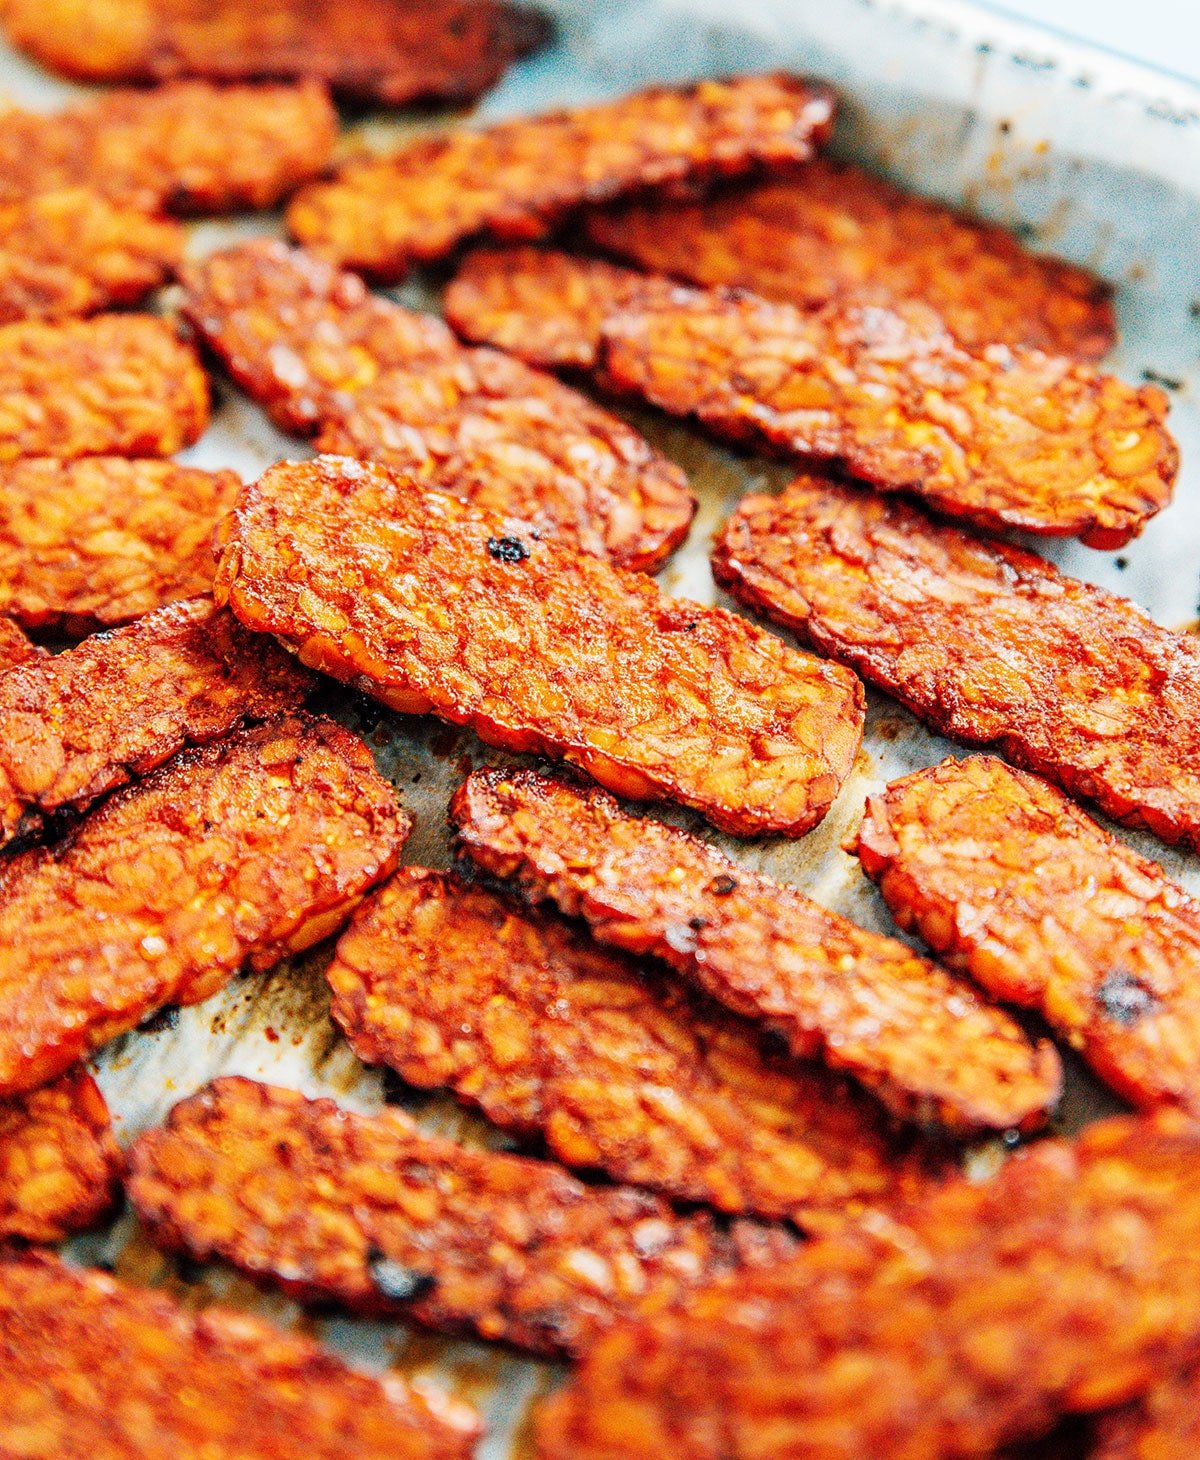 Smoky bacon flavored tempeh slices baked on a cookie sheet.